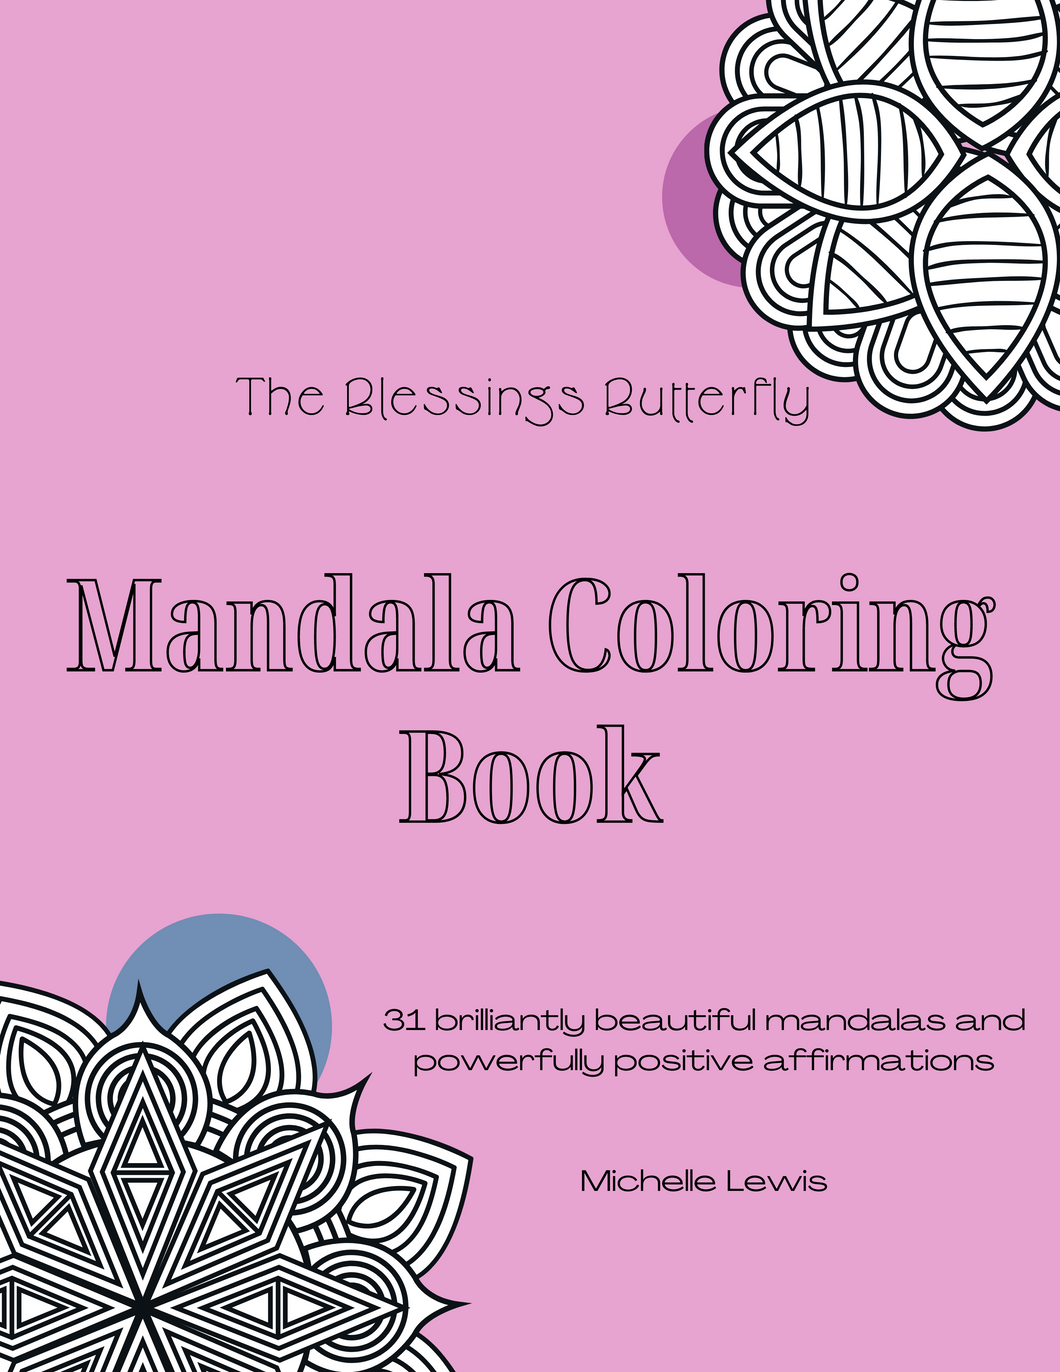 The Blessings Butterfly Mandala Coloring Book